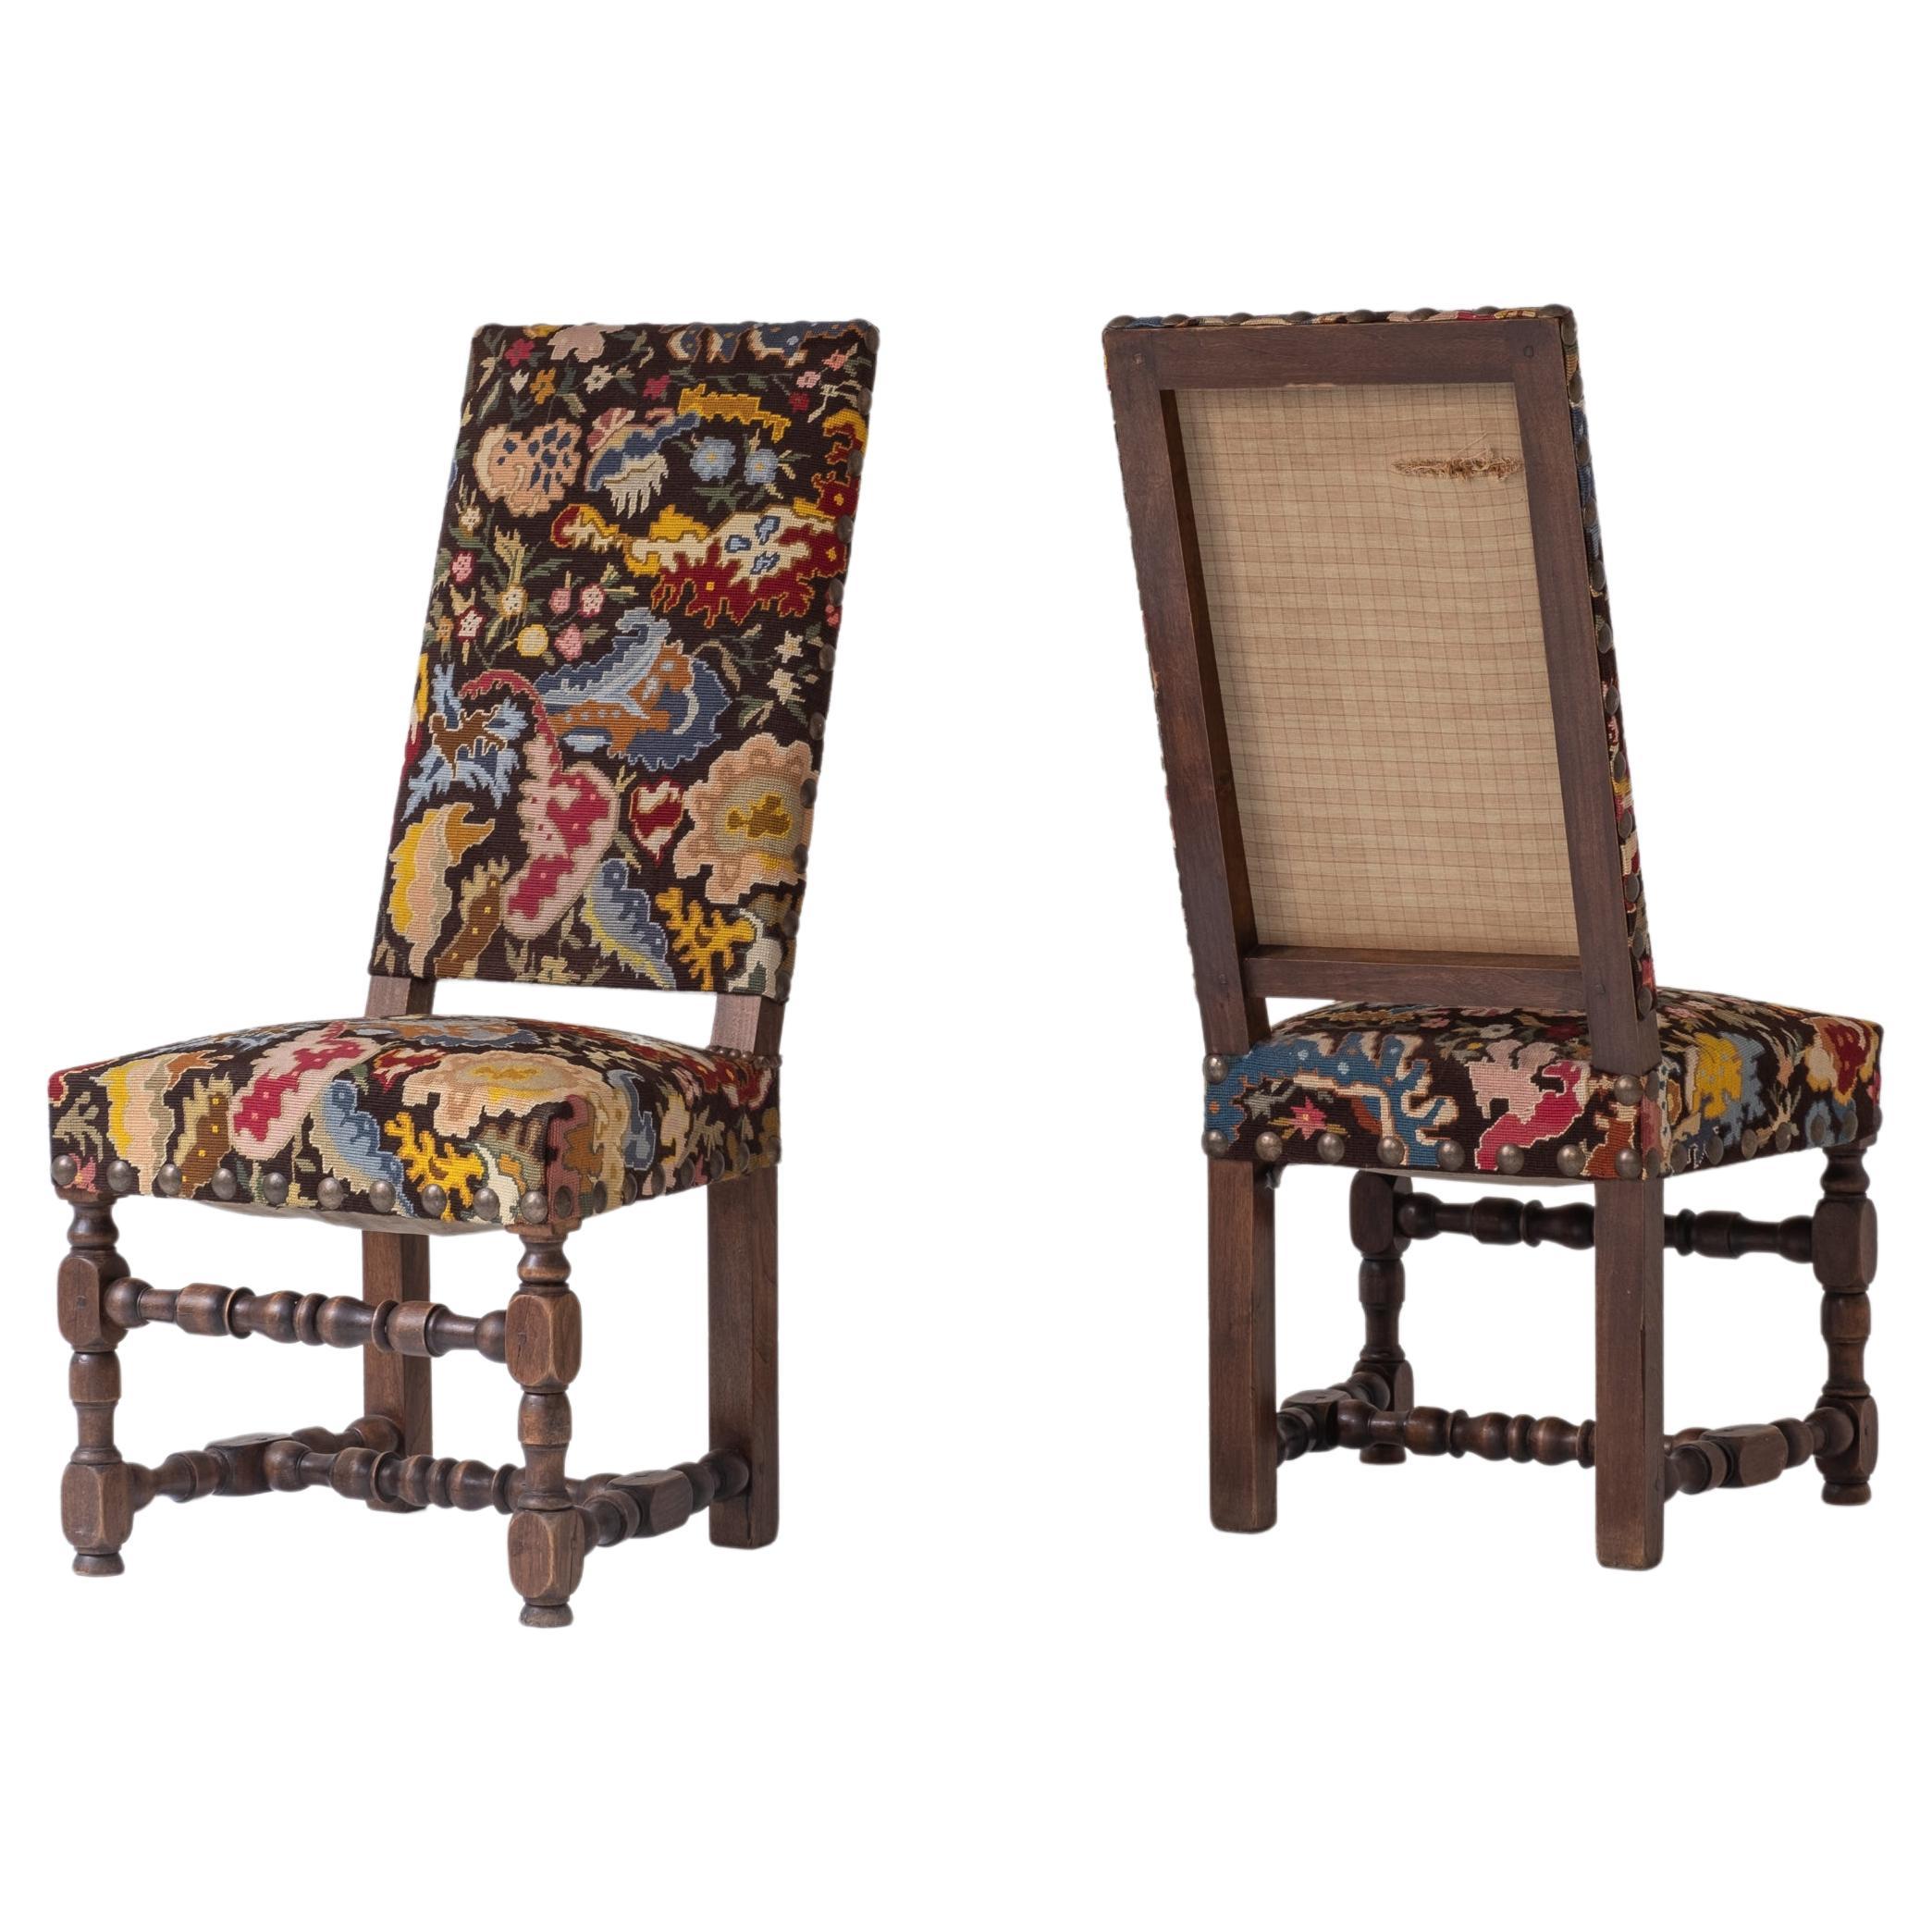 Rare pair baroque side chairs from France, circa 1890. 